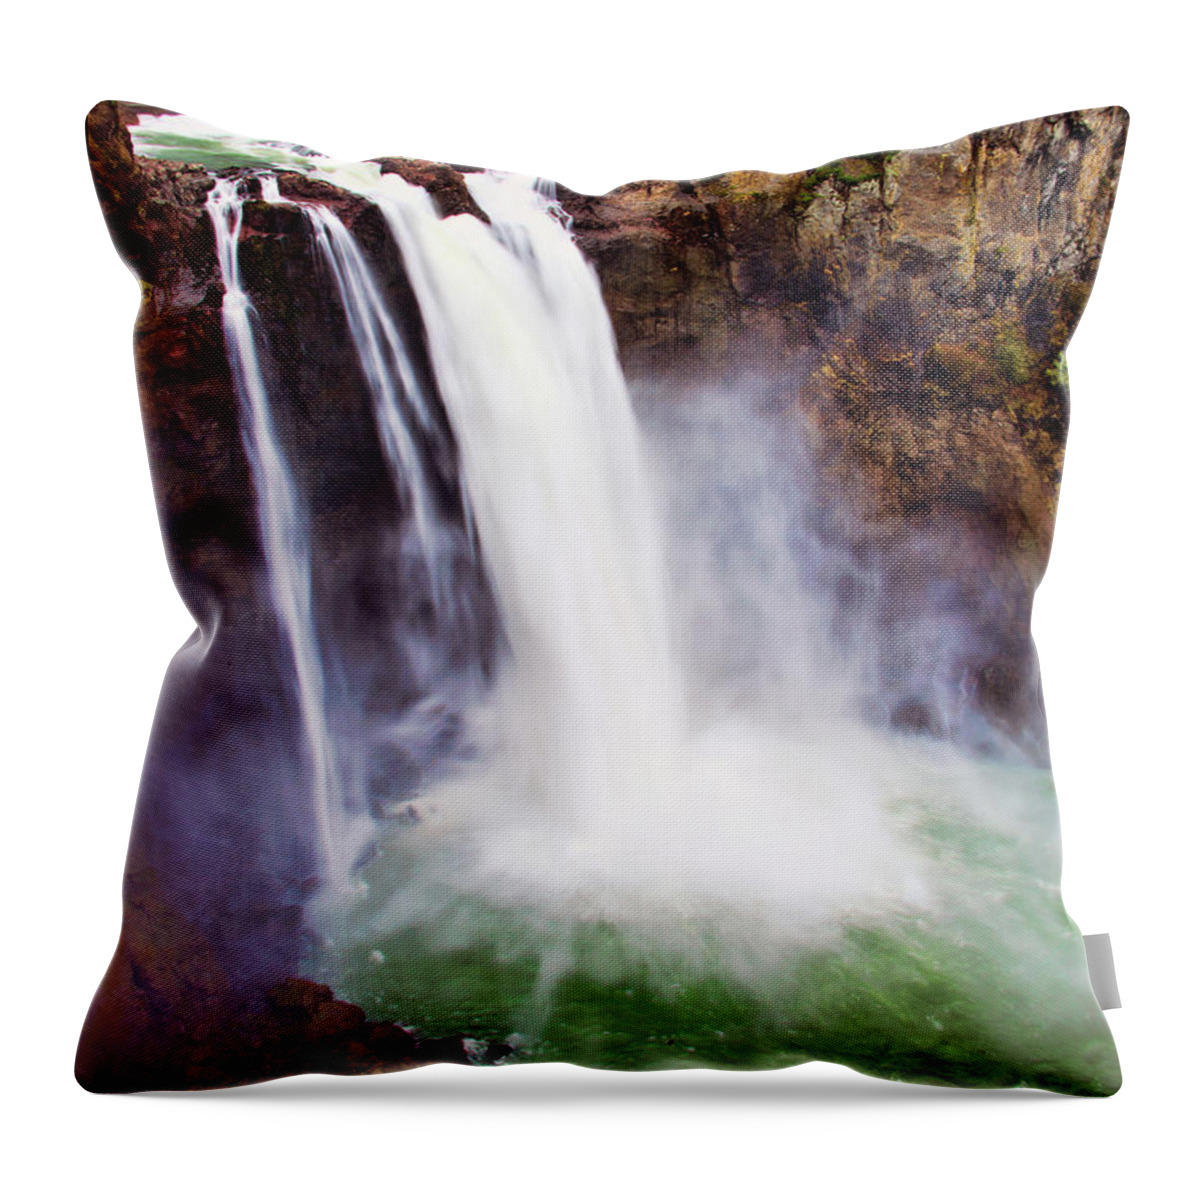 Snoqualmie Falls Throw Pillow featuring the photograph Snoqualmie Falls by Jerry Cahill